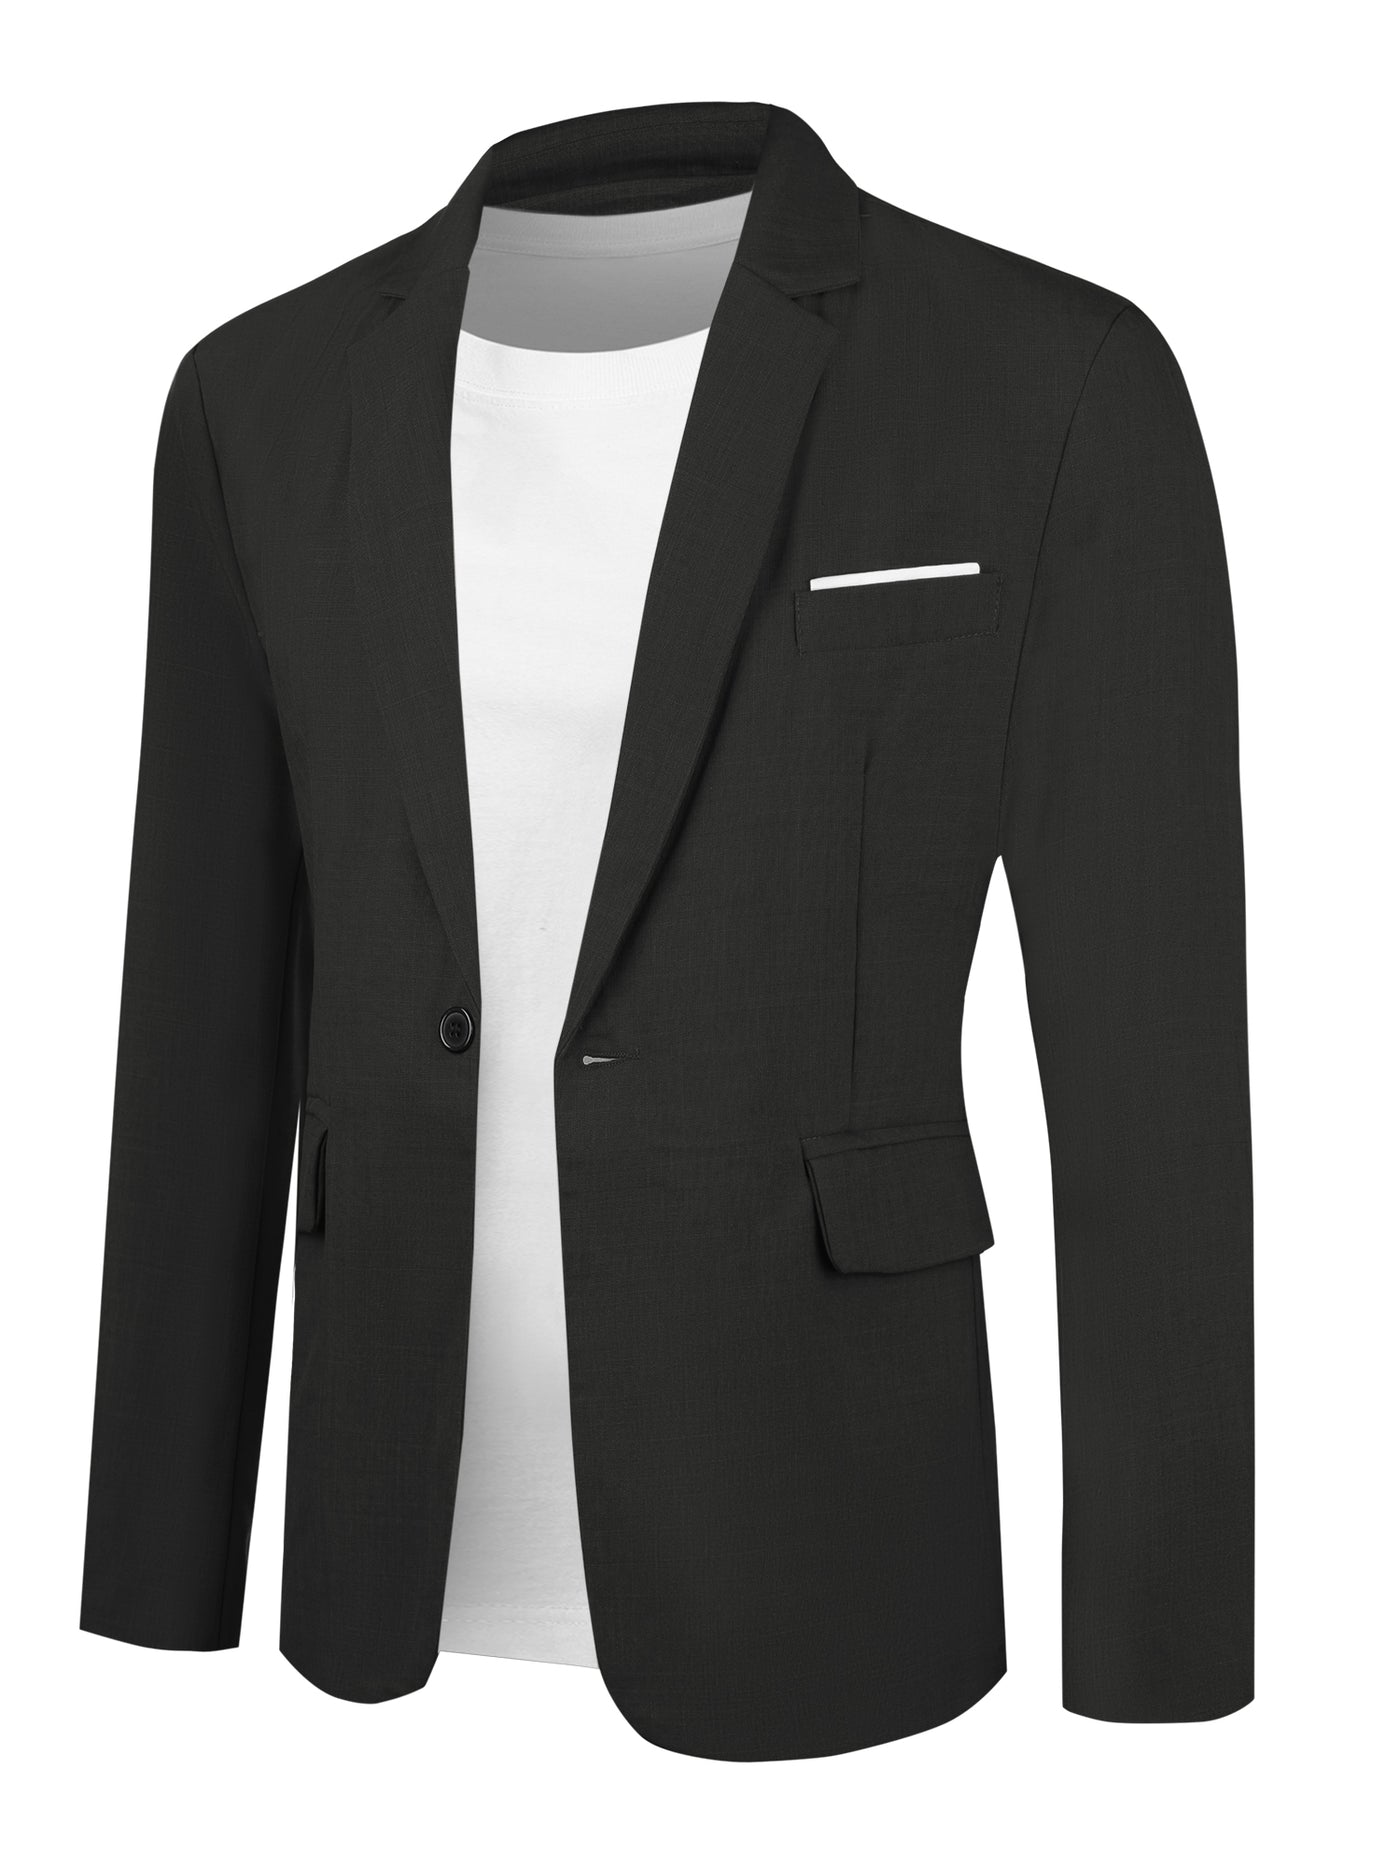 Bublédon Business Sports Coats for Men's Singled Breasted One Button Suit Blazers